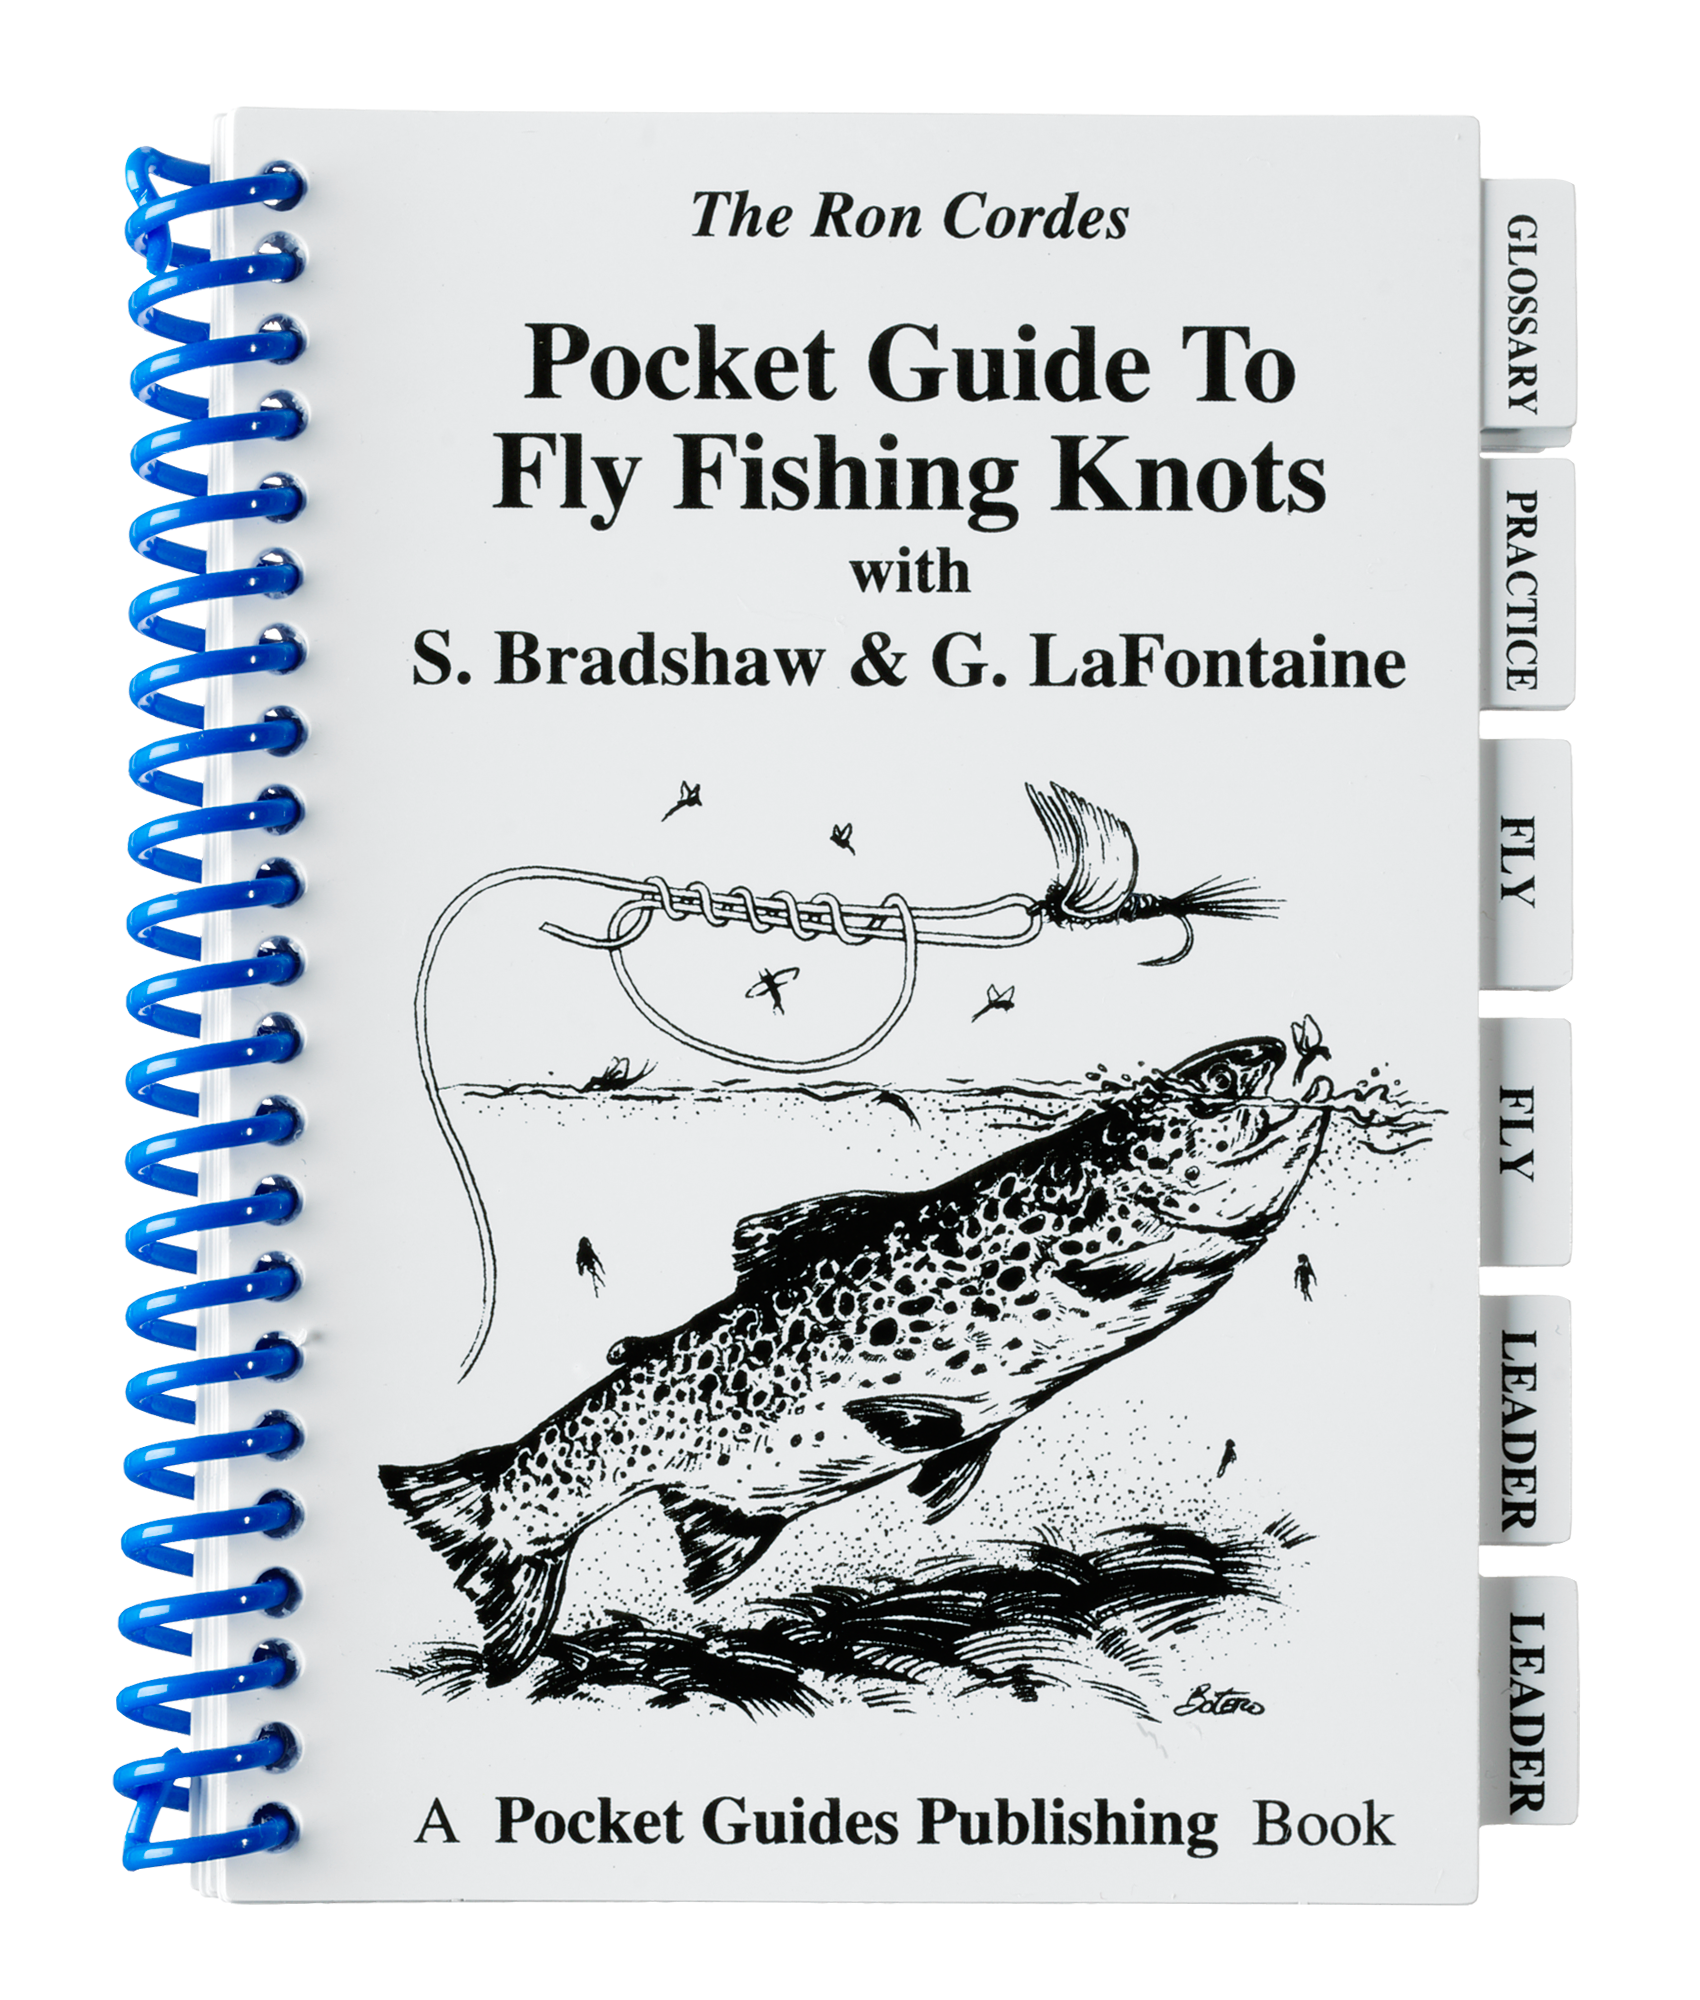 Pocket Guide to Fly Fishing Knots - Book by Ron Cordes, S